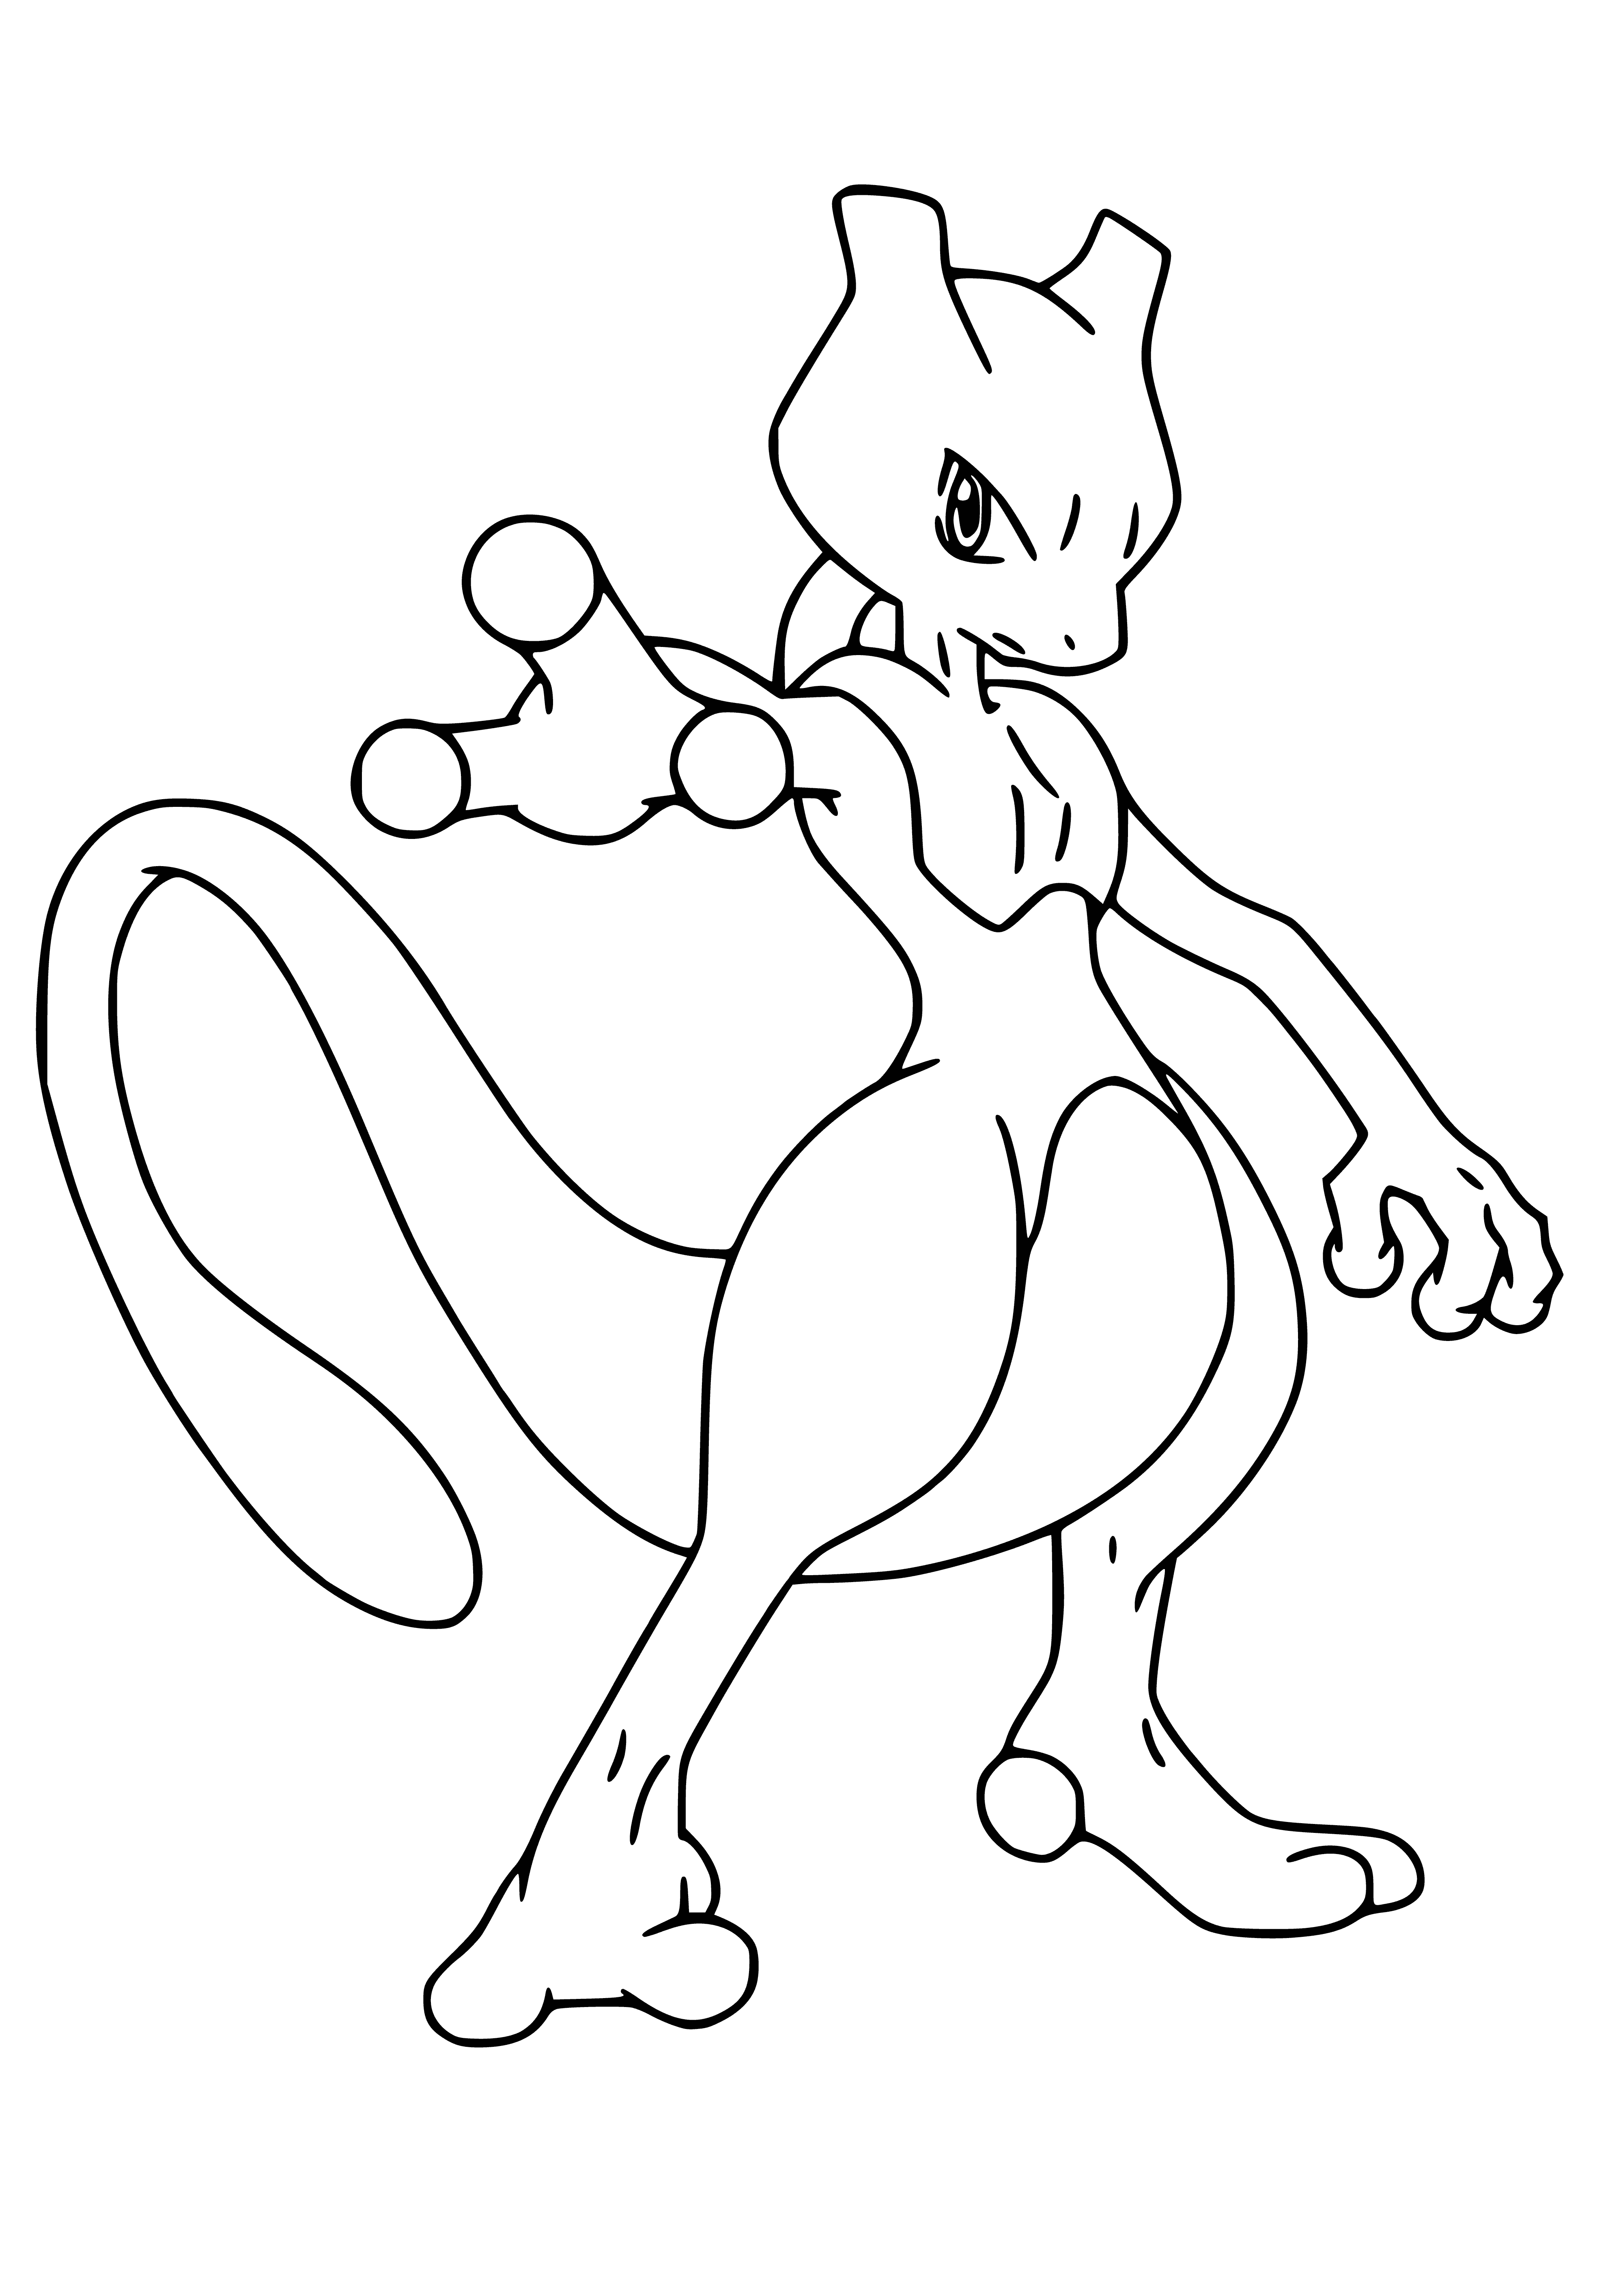 coloring page: Legendary Pokémon Mewtwo is a rare Genetic Pokémon created from Mew's mutant clone.